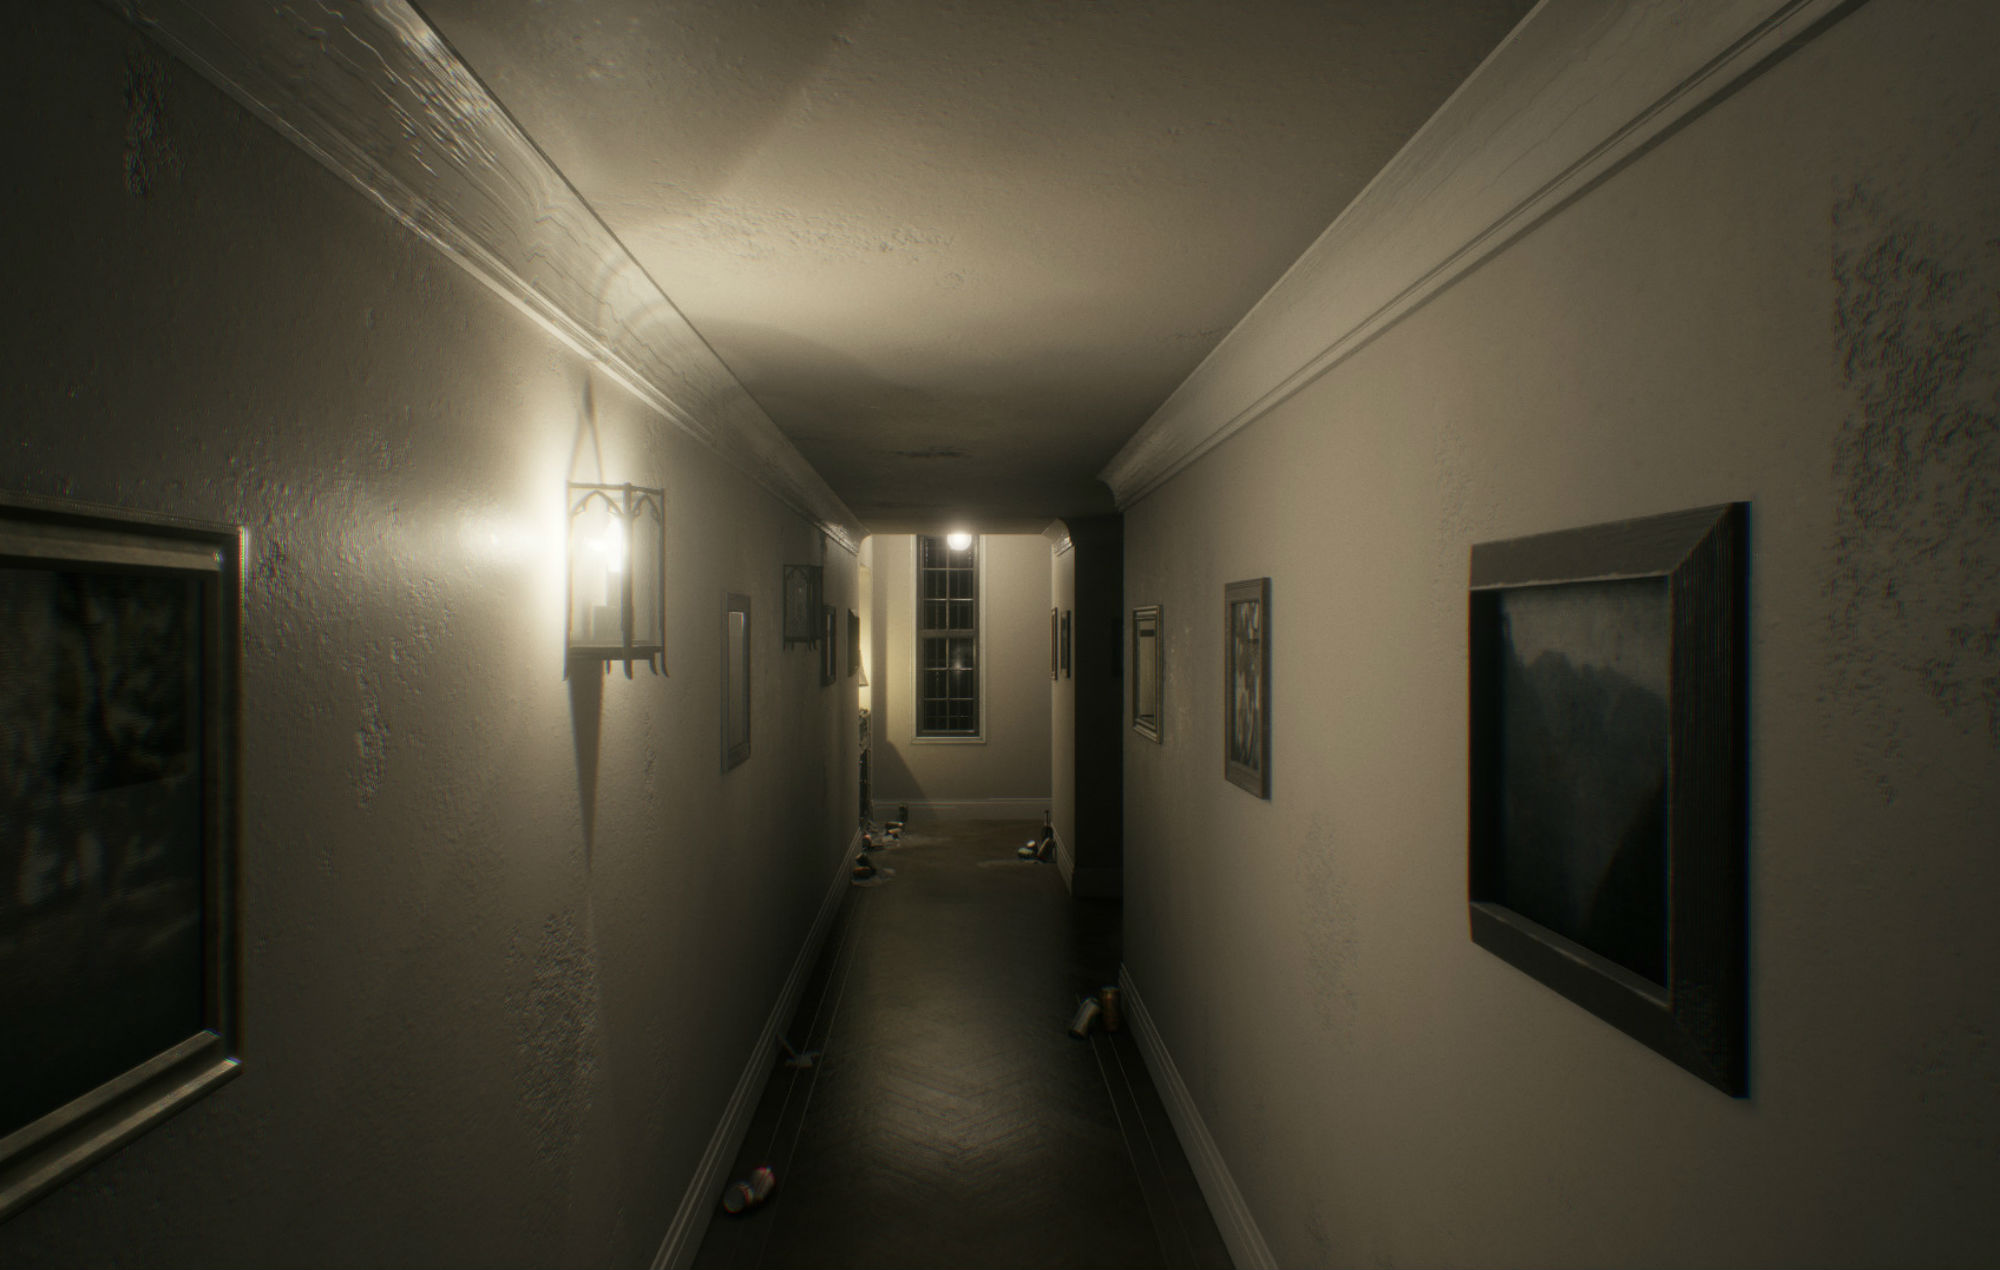 Major figures mourn Silent Hills as cancellation appears likely